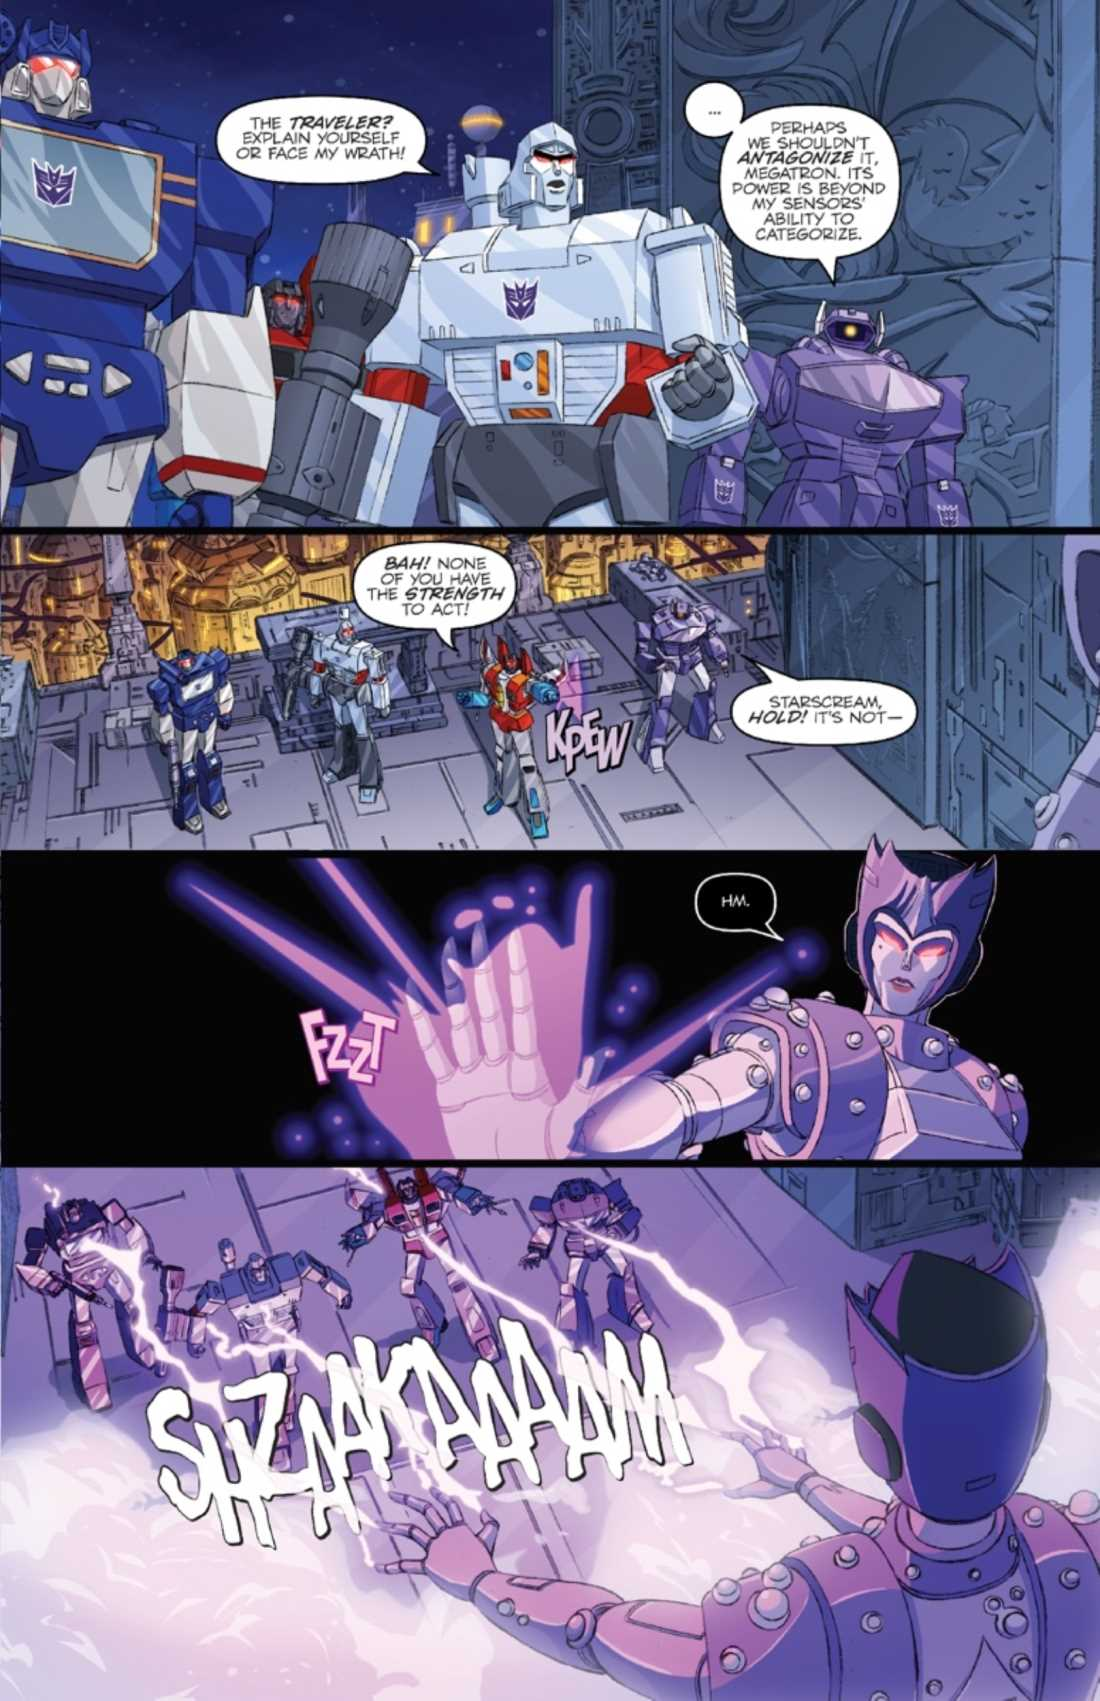 Transformers News: Re: IDW Transformers x Ghostbusters Comic Discussion